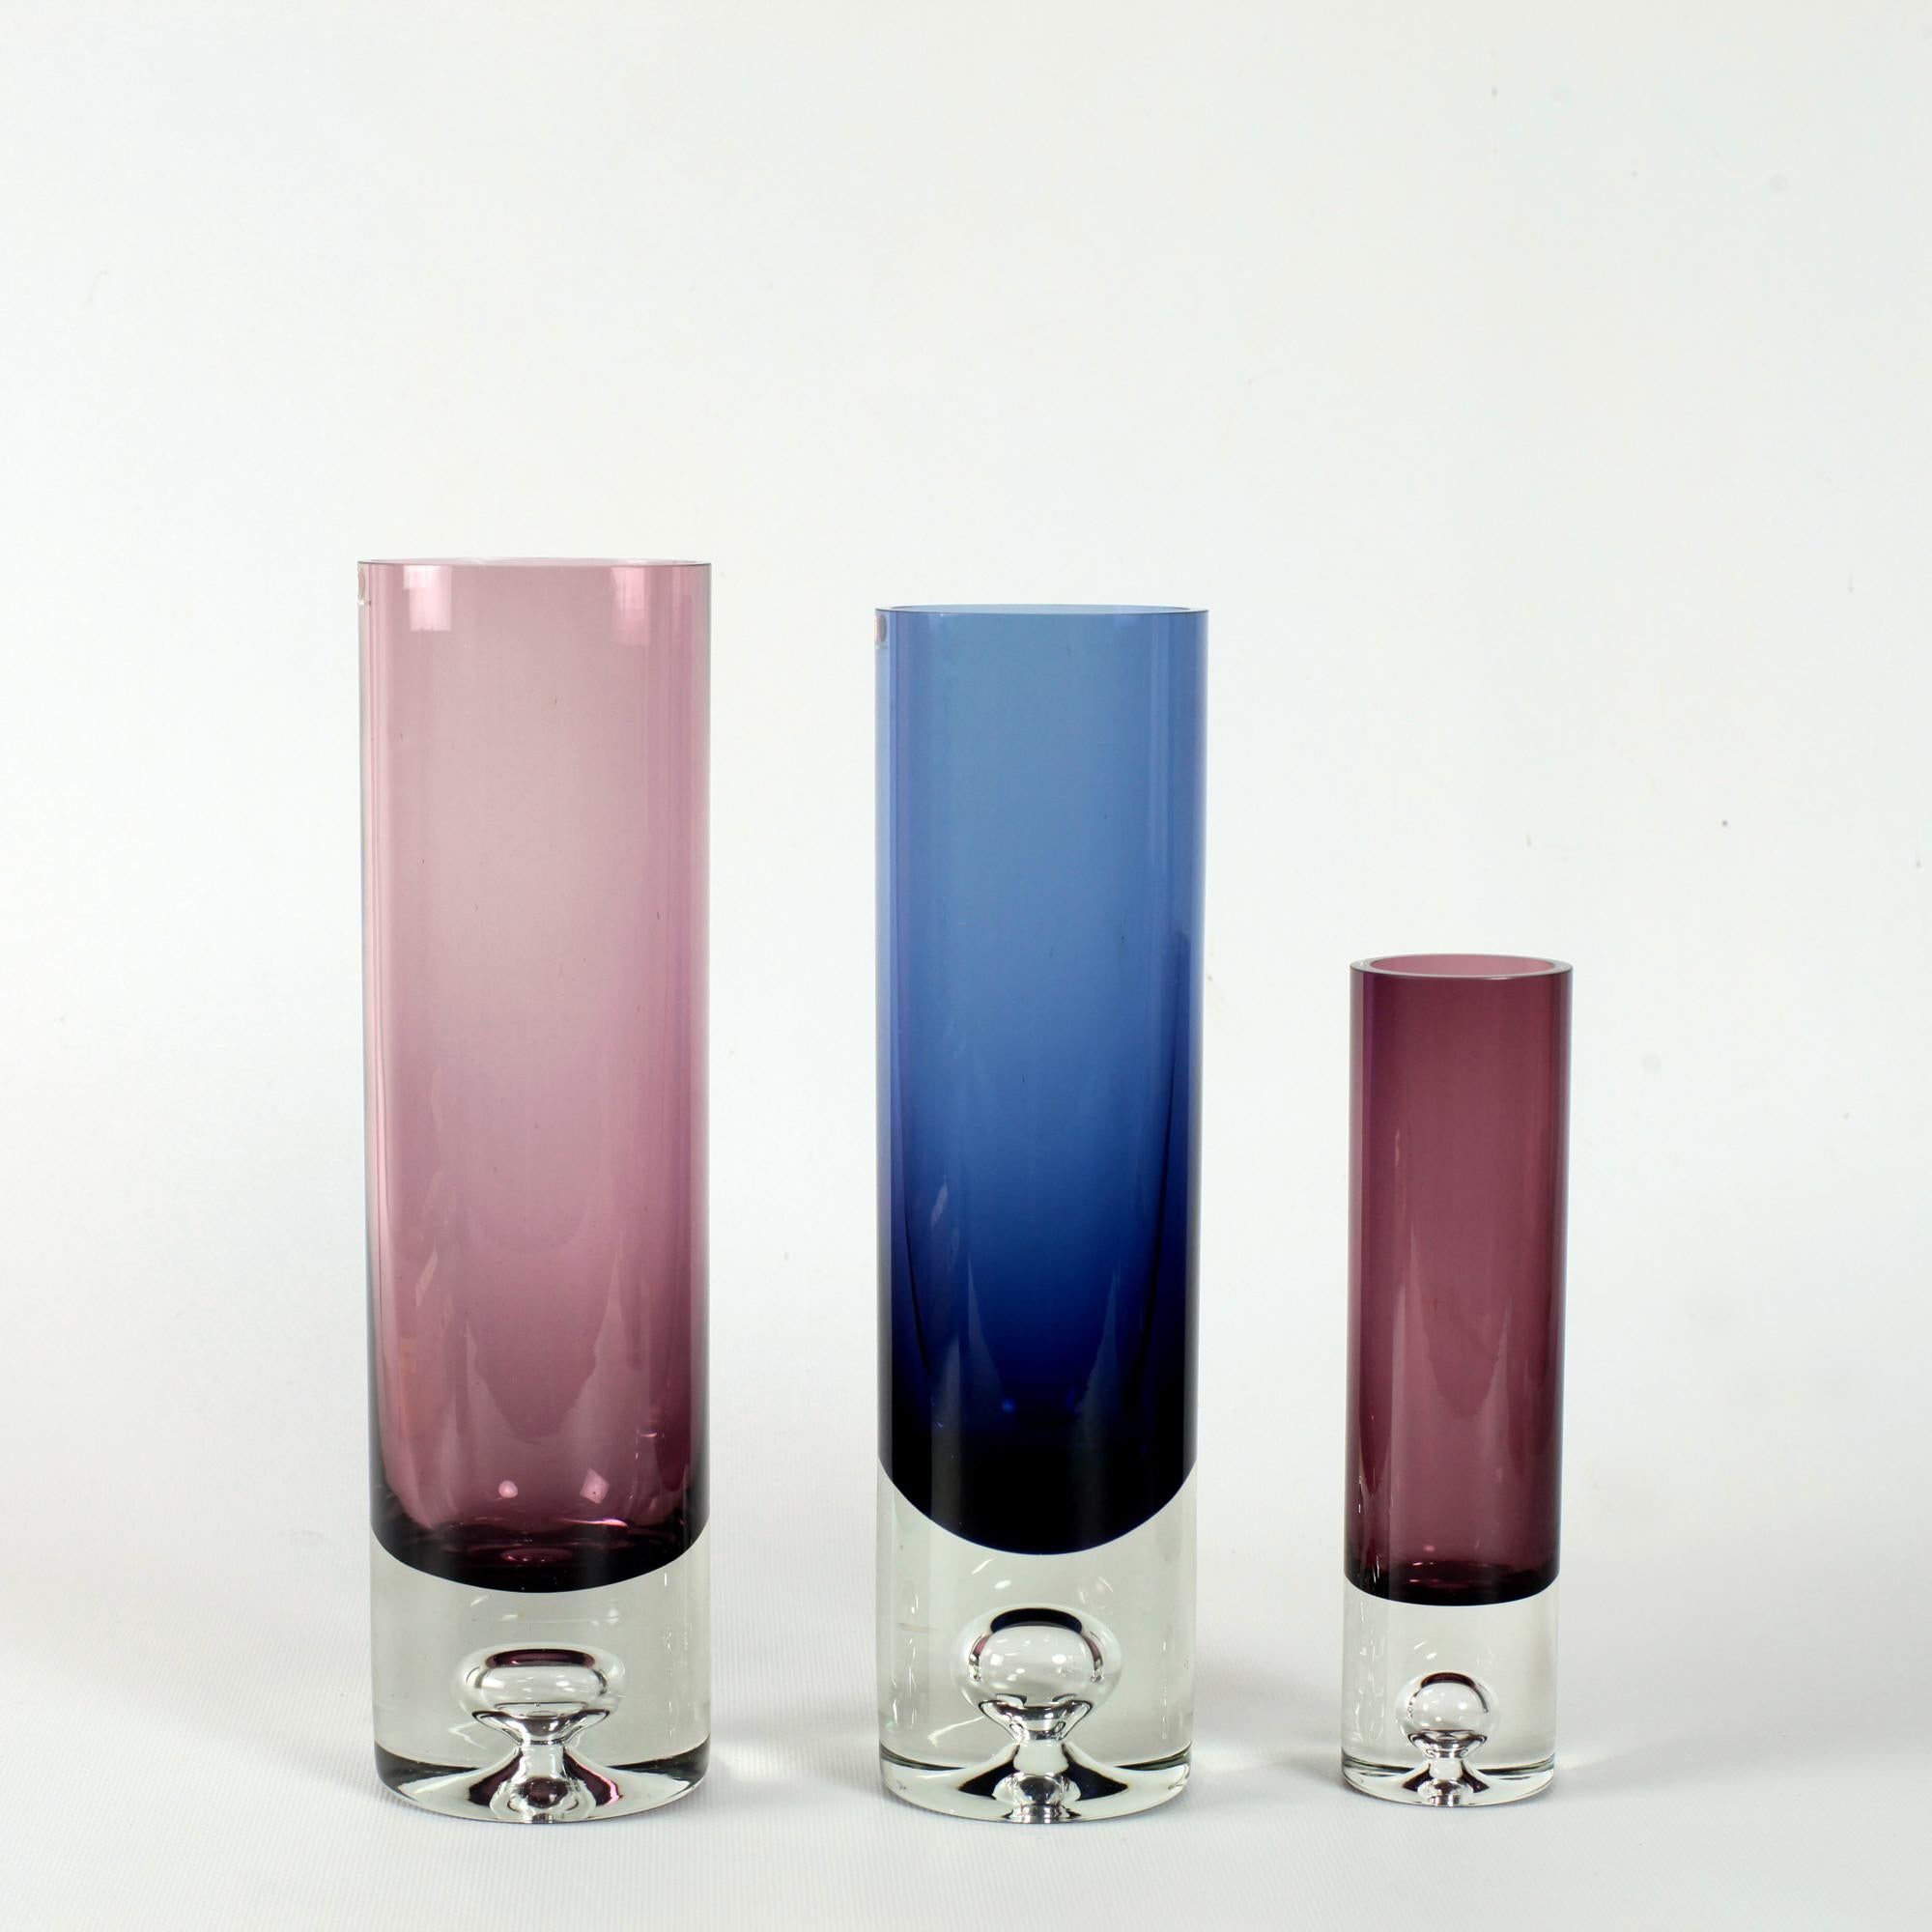 Set of 3 colored glass vases with bubble in base designed by Tapio Wirkkala for Iittala Finland in 1959 and made throughout the 1960s.
Tapio Wirkkala signature and model number engraved under the base.
Dimensions: 8cm/28cm ; 7,5cm/27cm ; 5cm/19cm